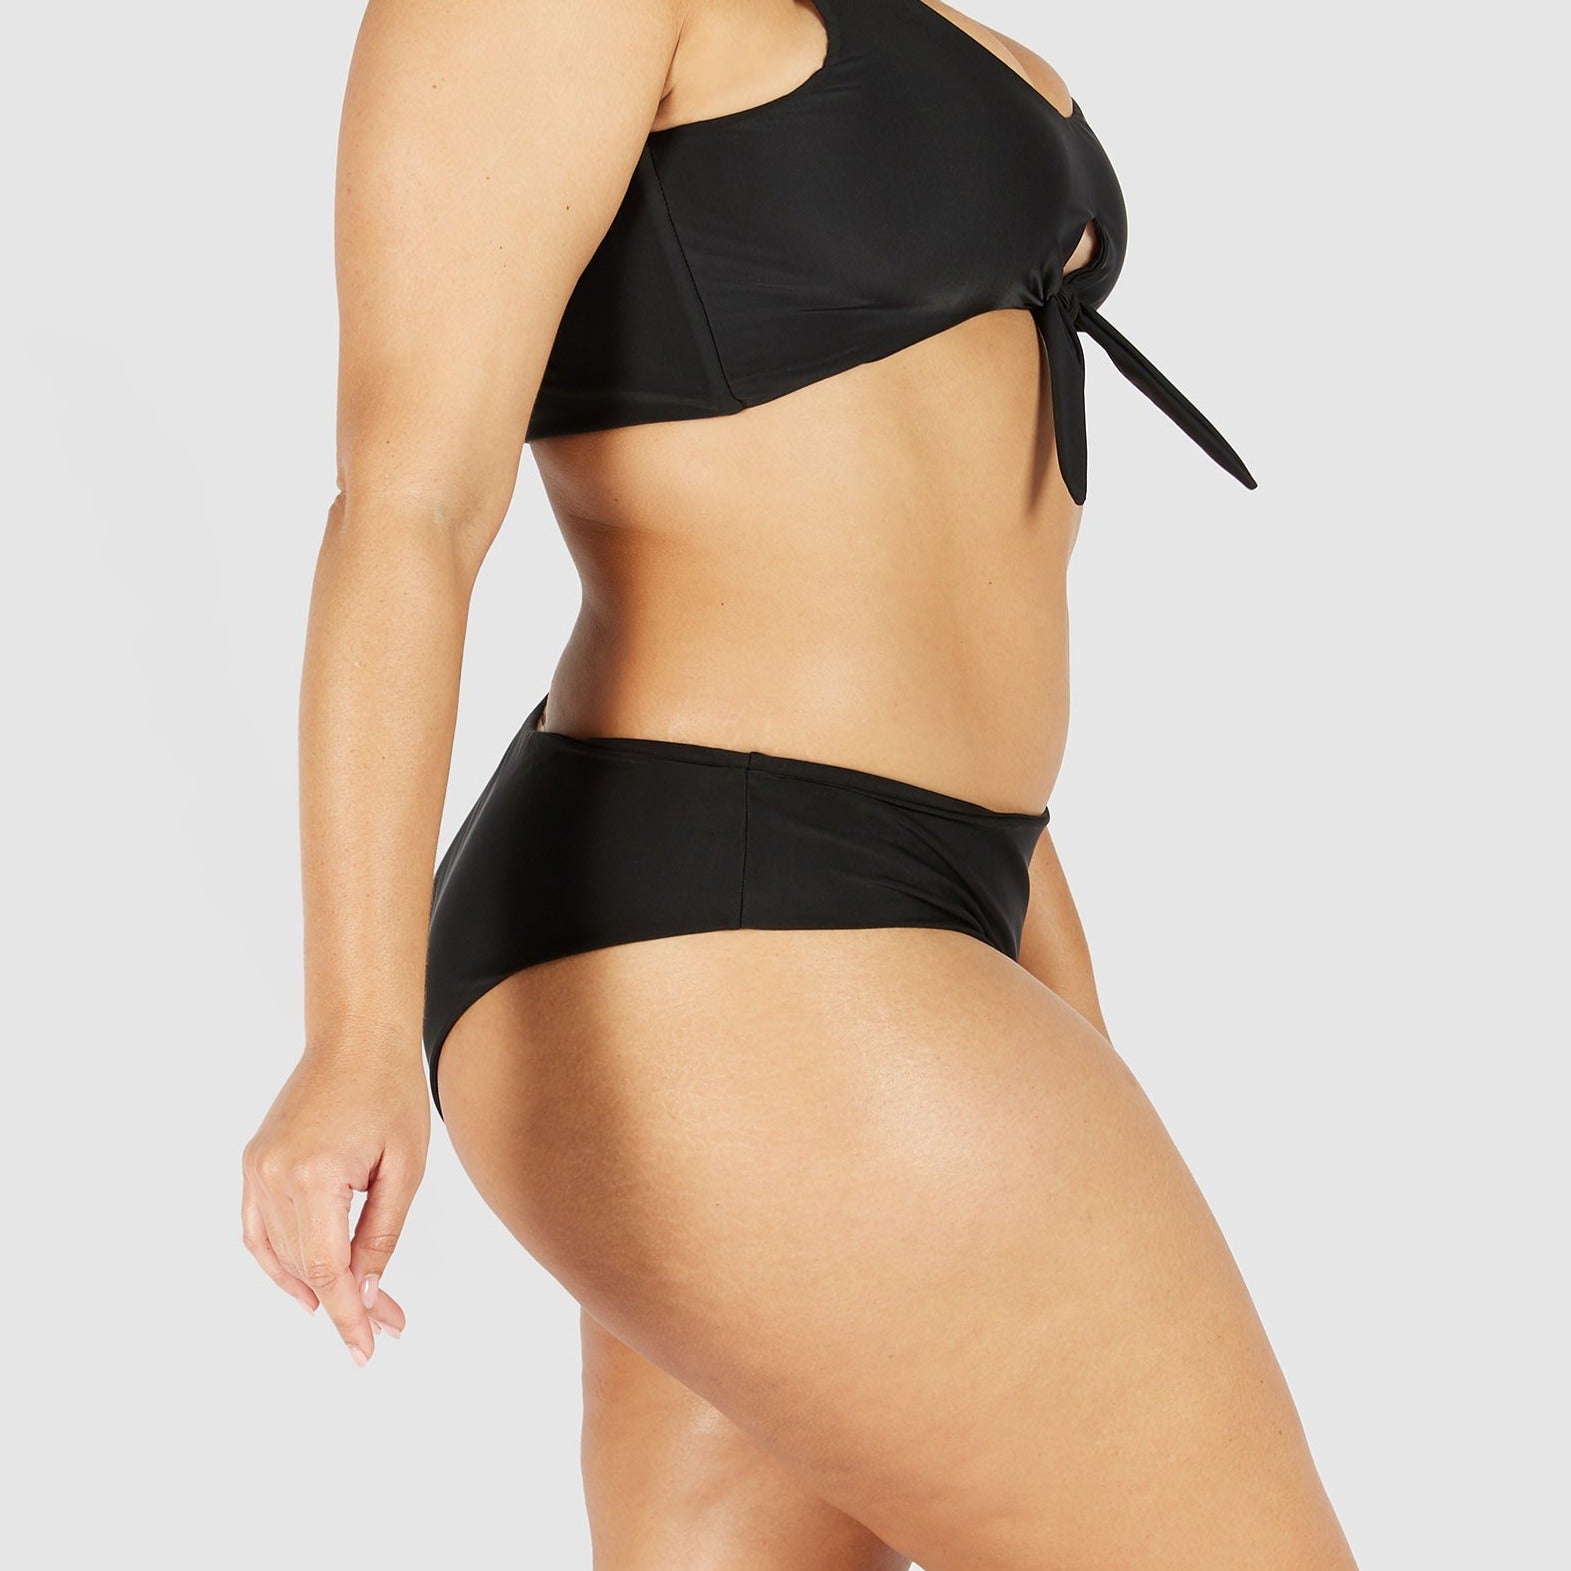 To Be Free — I am doing it: for super low-rise bikini bottoms